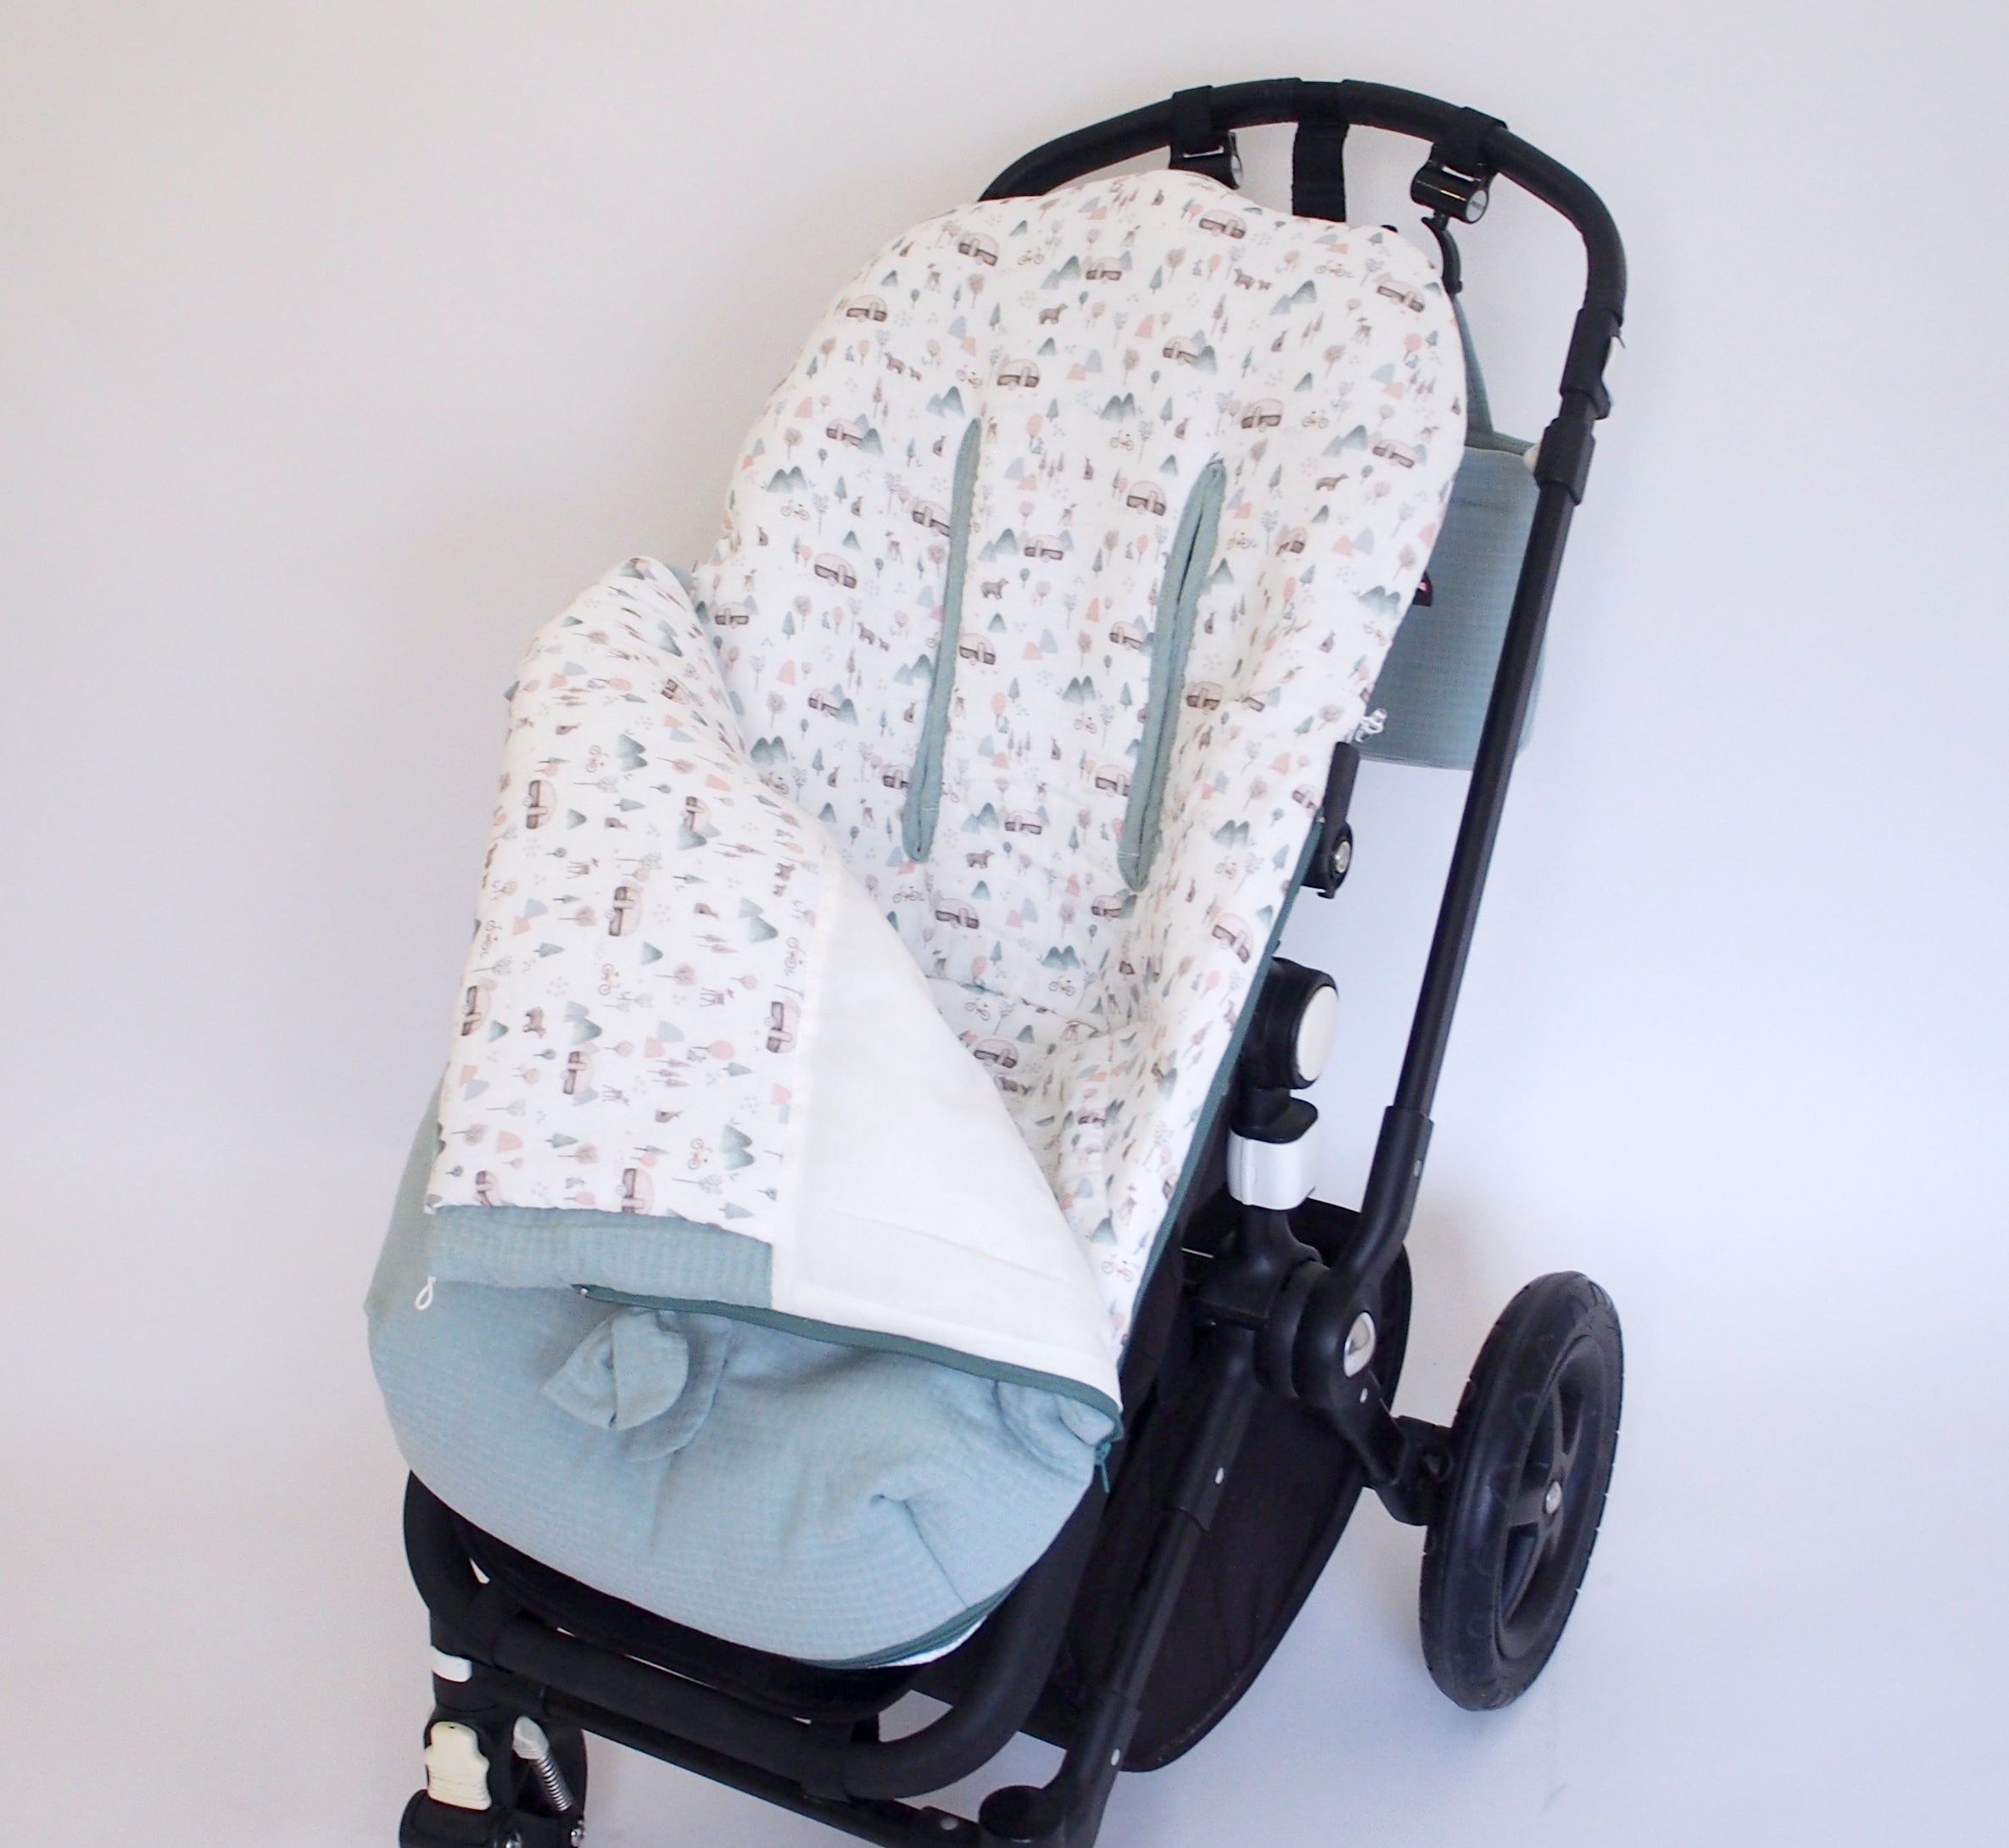 Baby Monsters Saco silla de paseo universal y bugaboo color verde forest